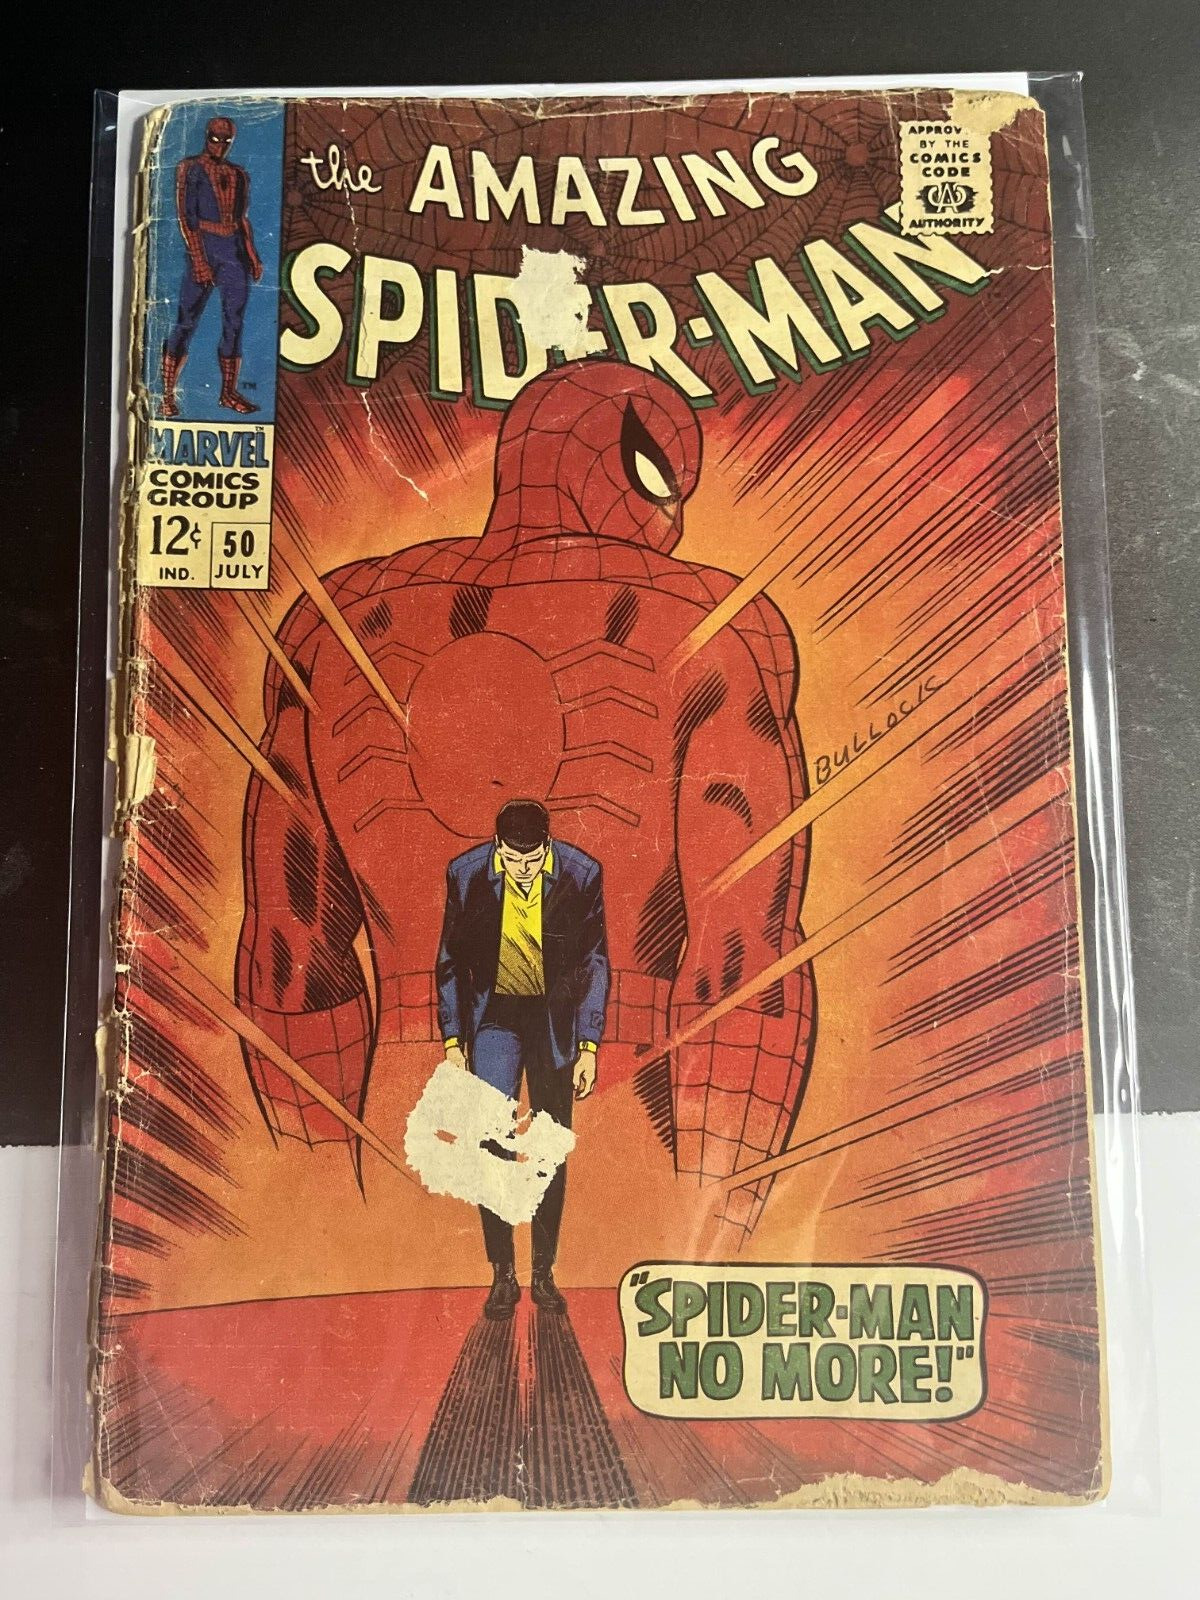 The Amazing Spiderman #50 (1967) - 1st Appearance of Kingpin